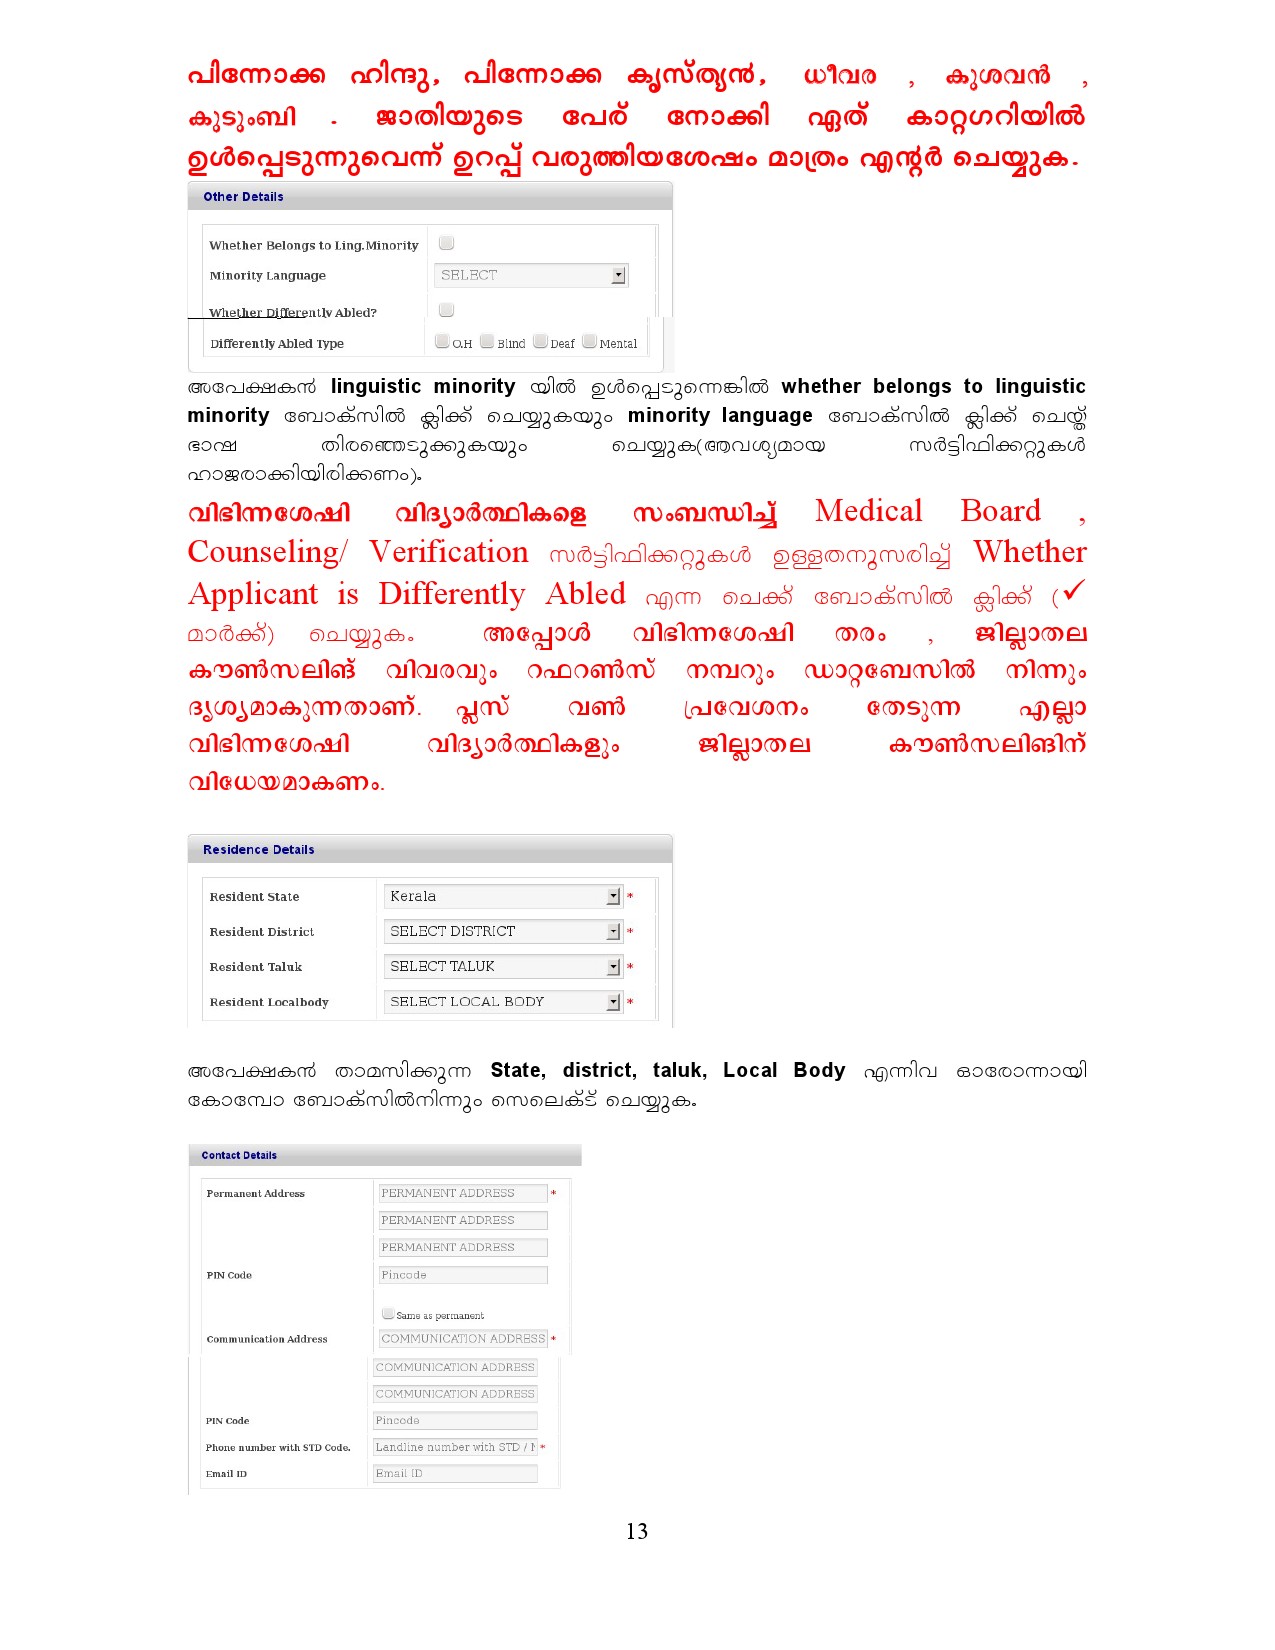 Higher Secondary School Online Application Manual in Malayalam - Notification Image 13